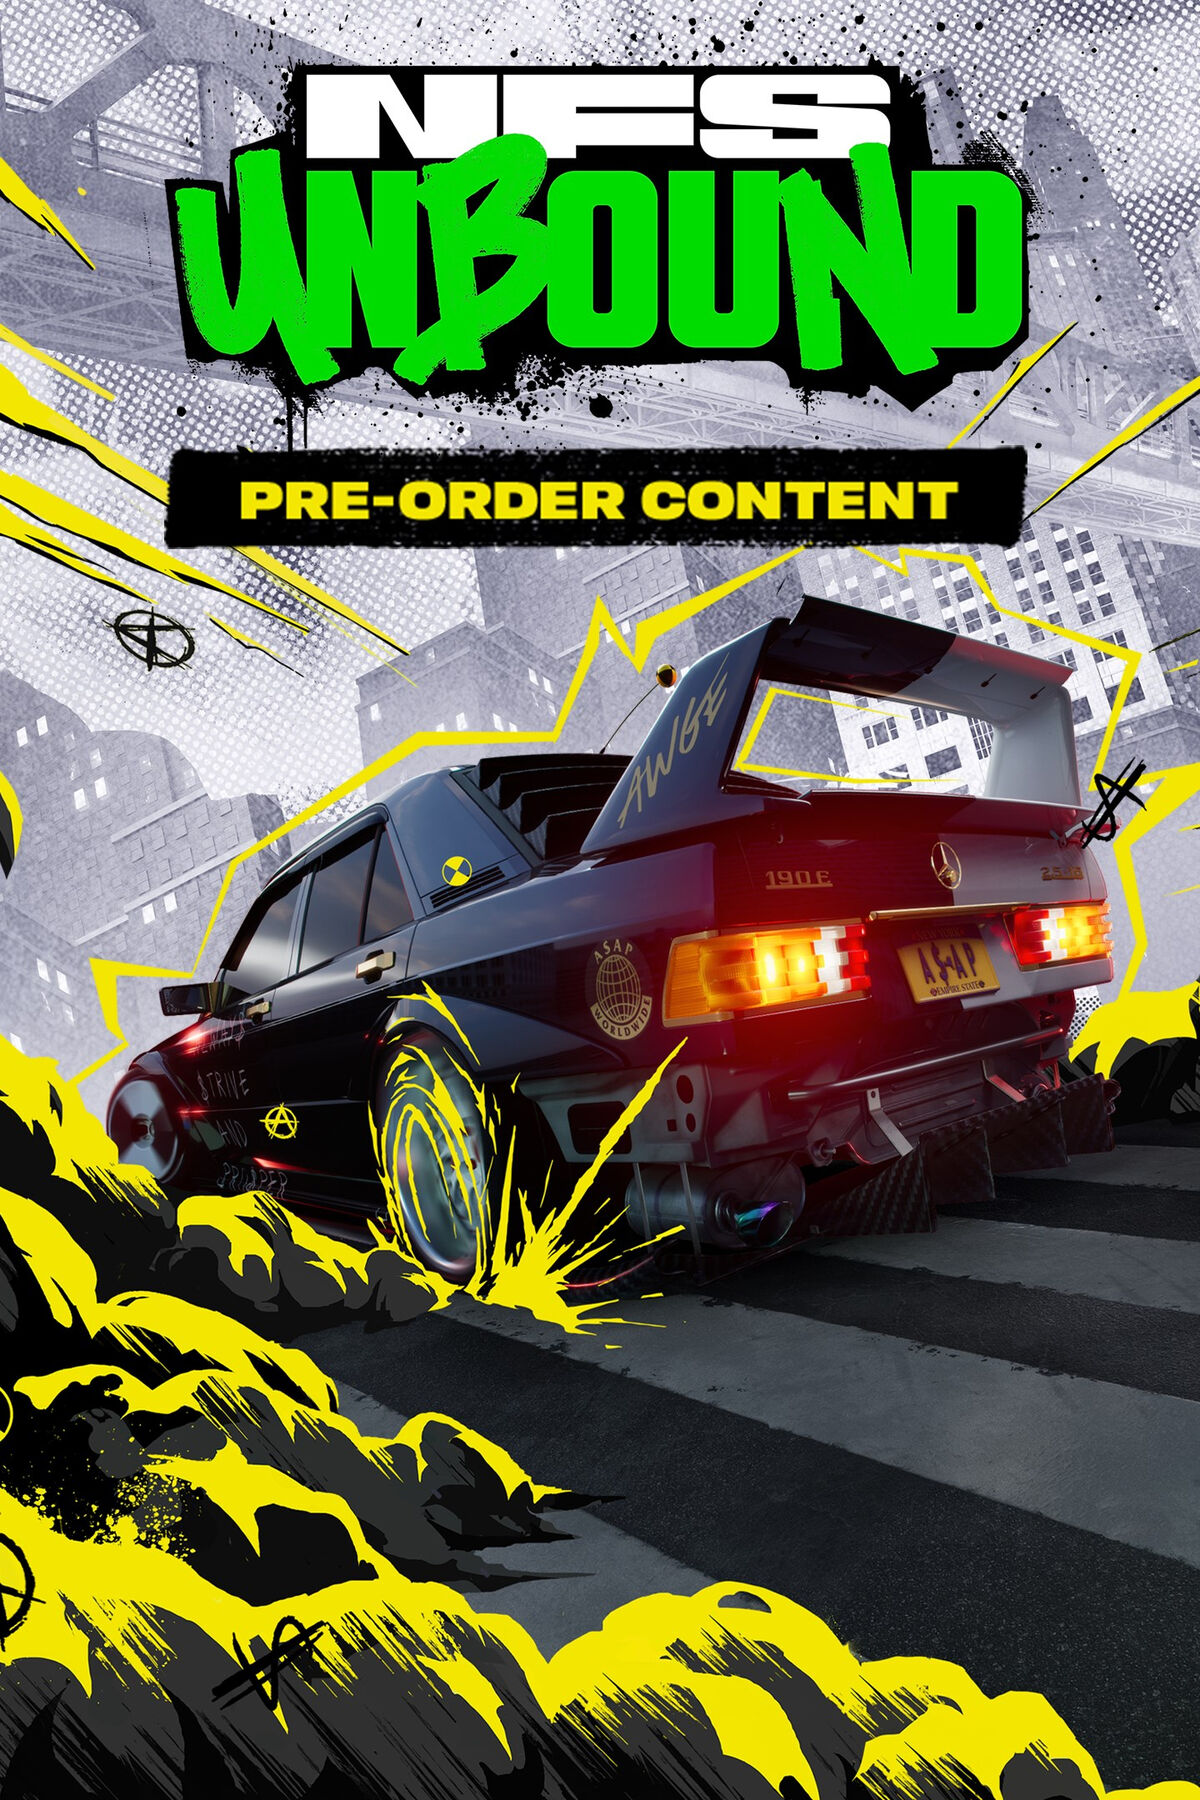 Pre-Order Content, Need for Speed Wiki